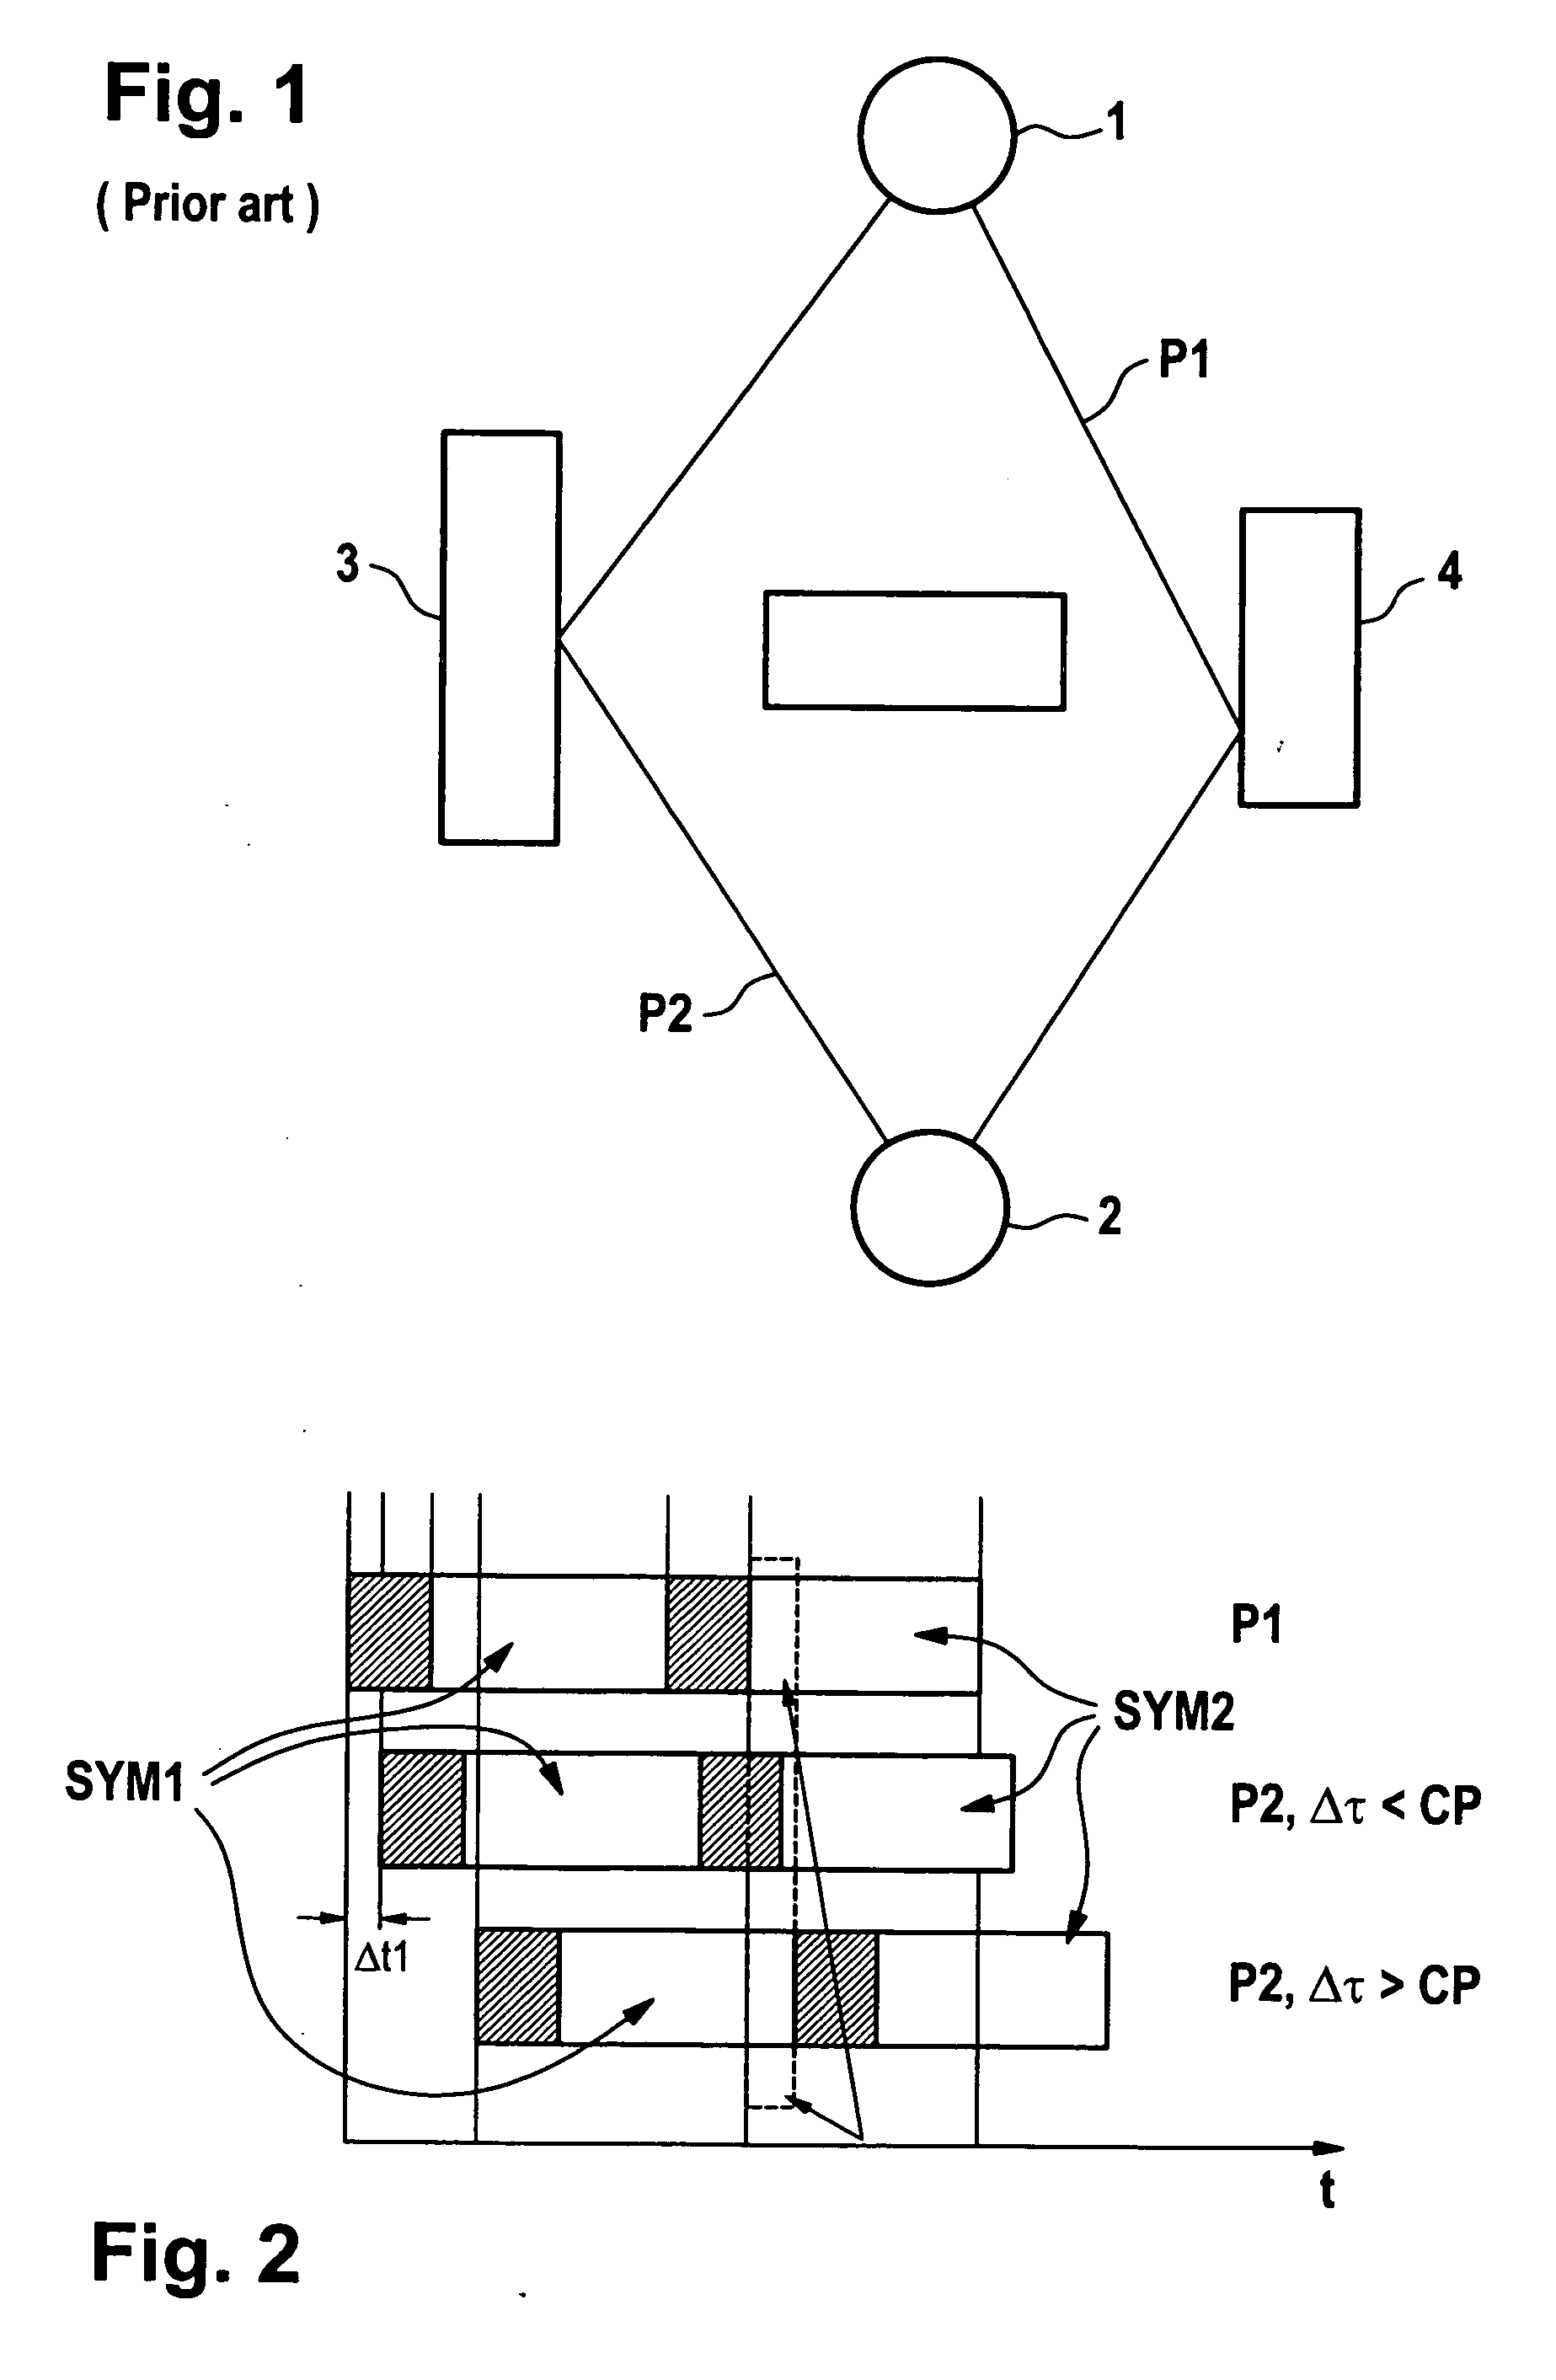 Method and system for improving the quality of a radio signal